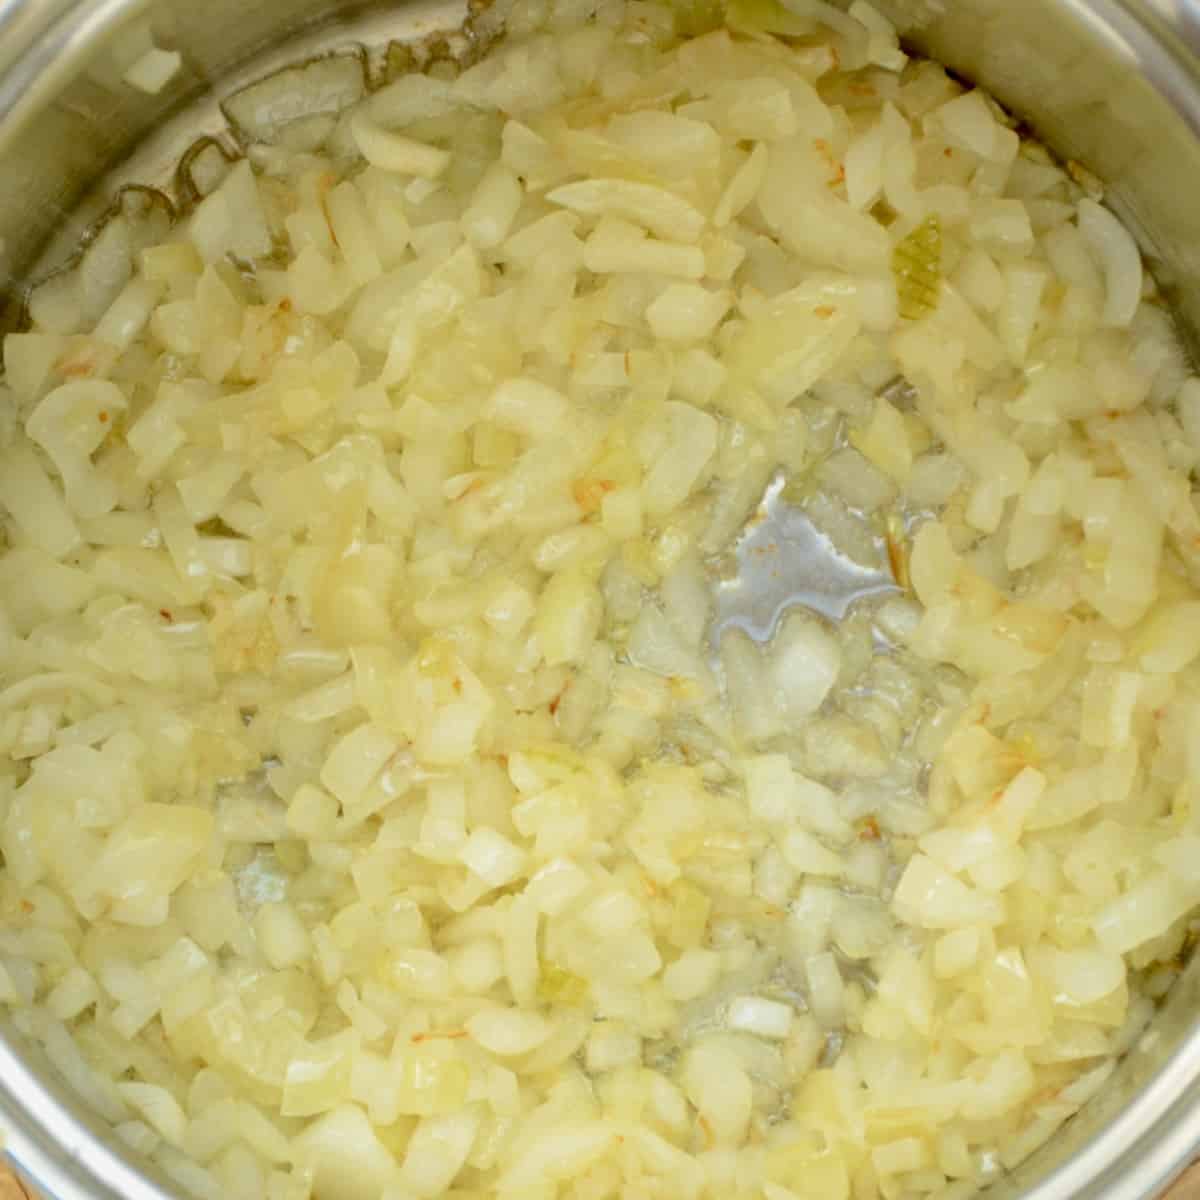 Diced onions stating to brown in a saucepan.